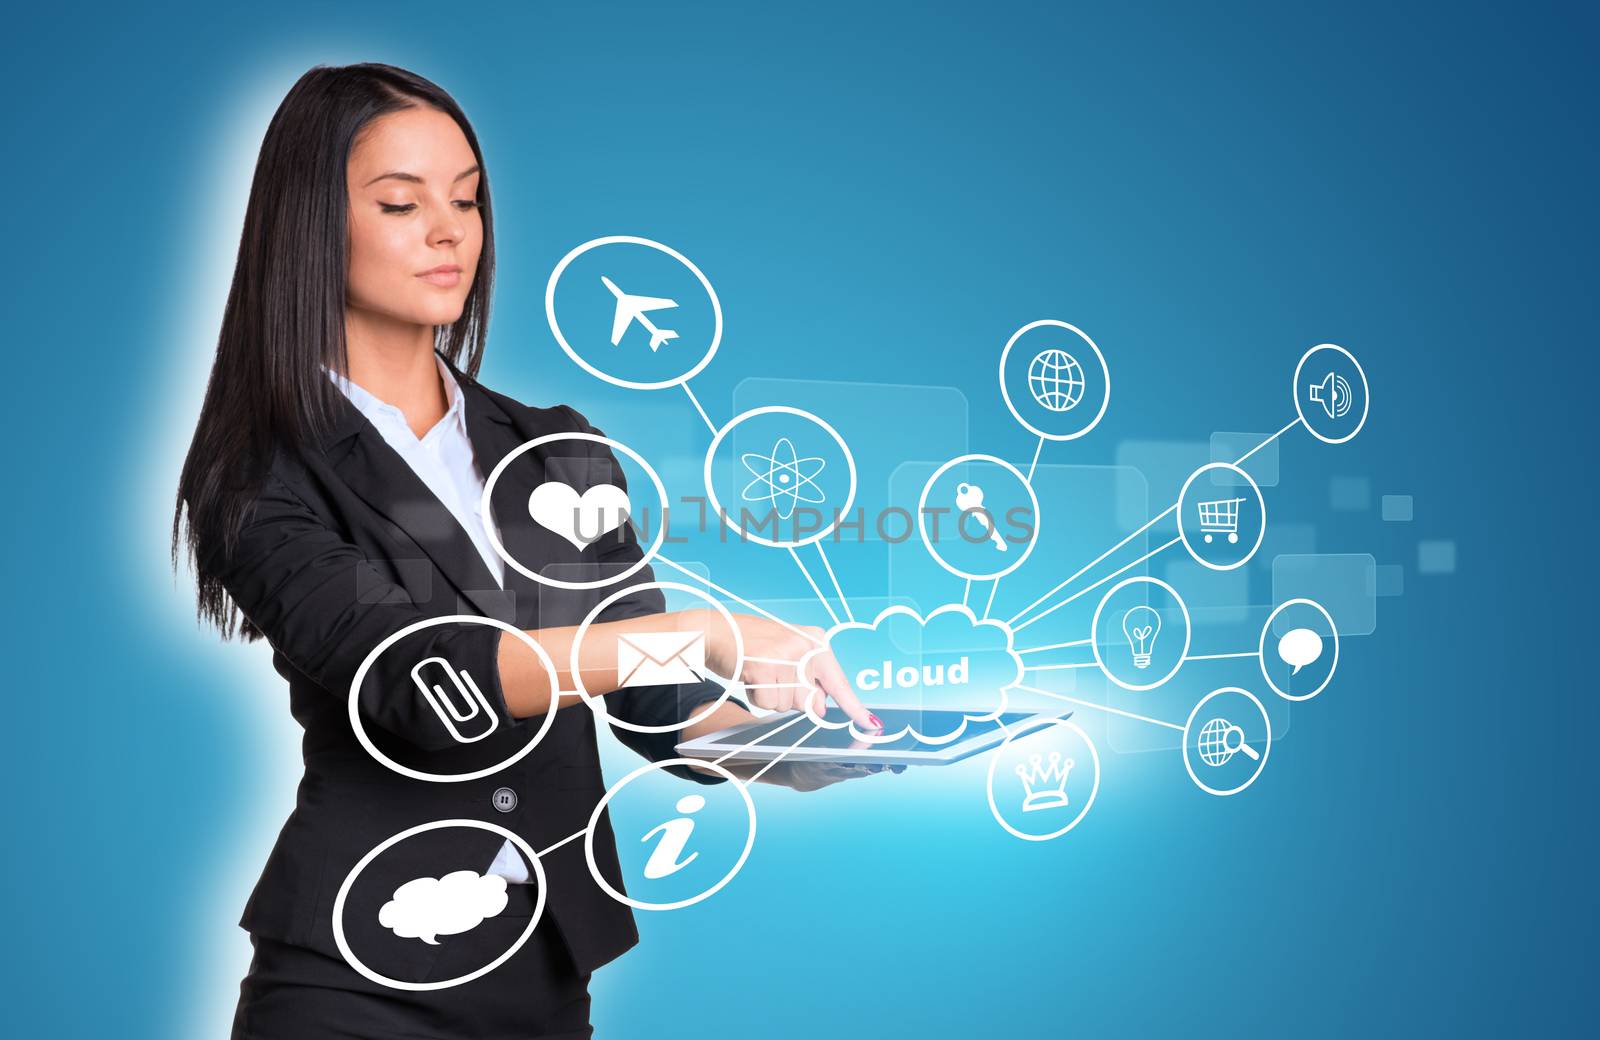 Beautiful businesswomen in suit using digital tablet. Cloud with icons. Blue background